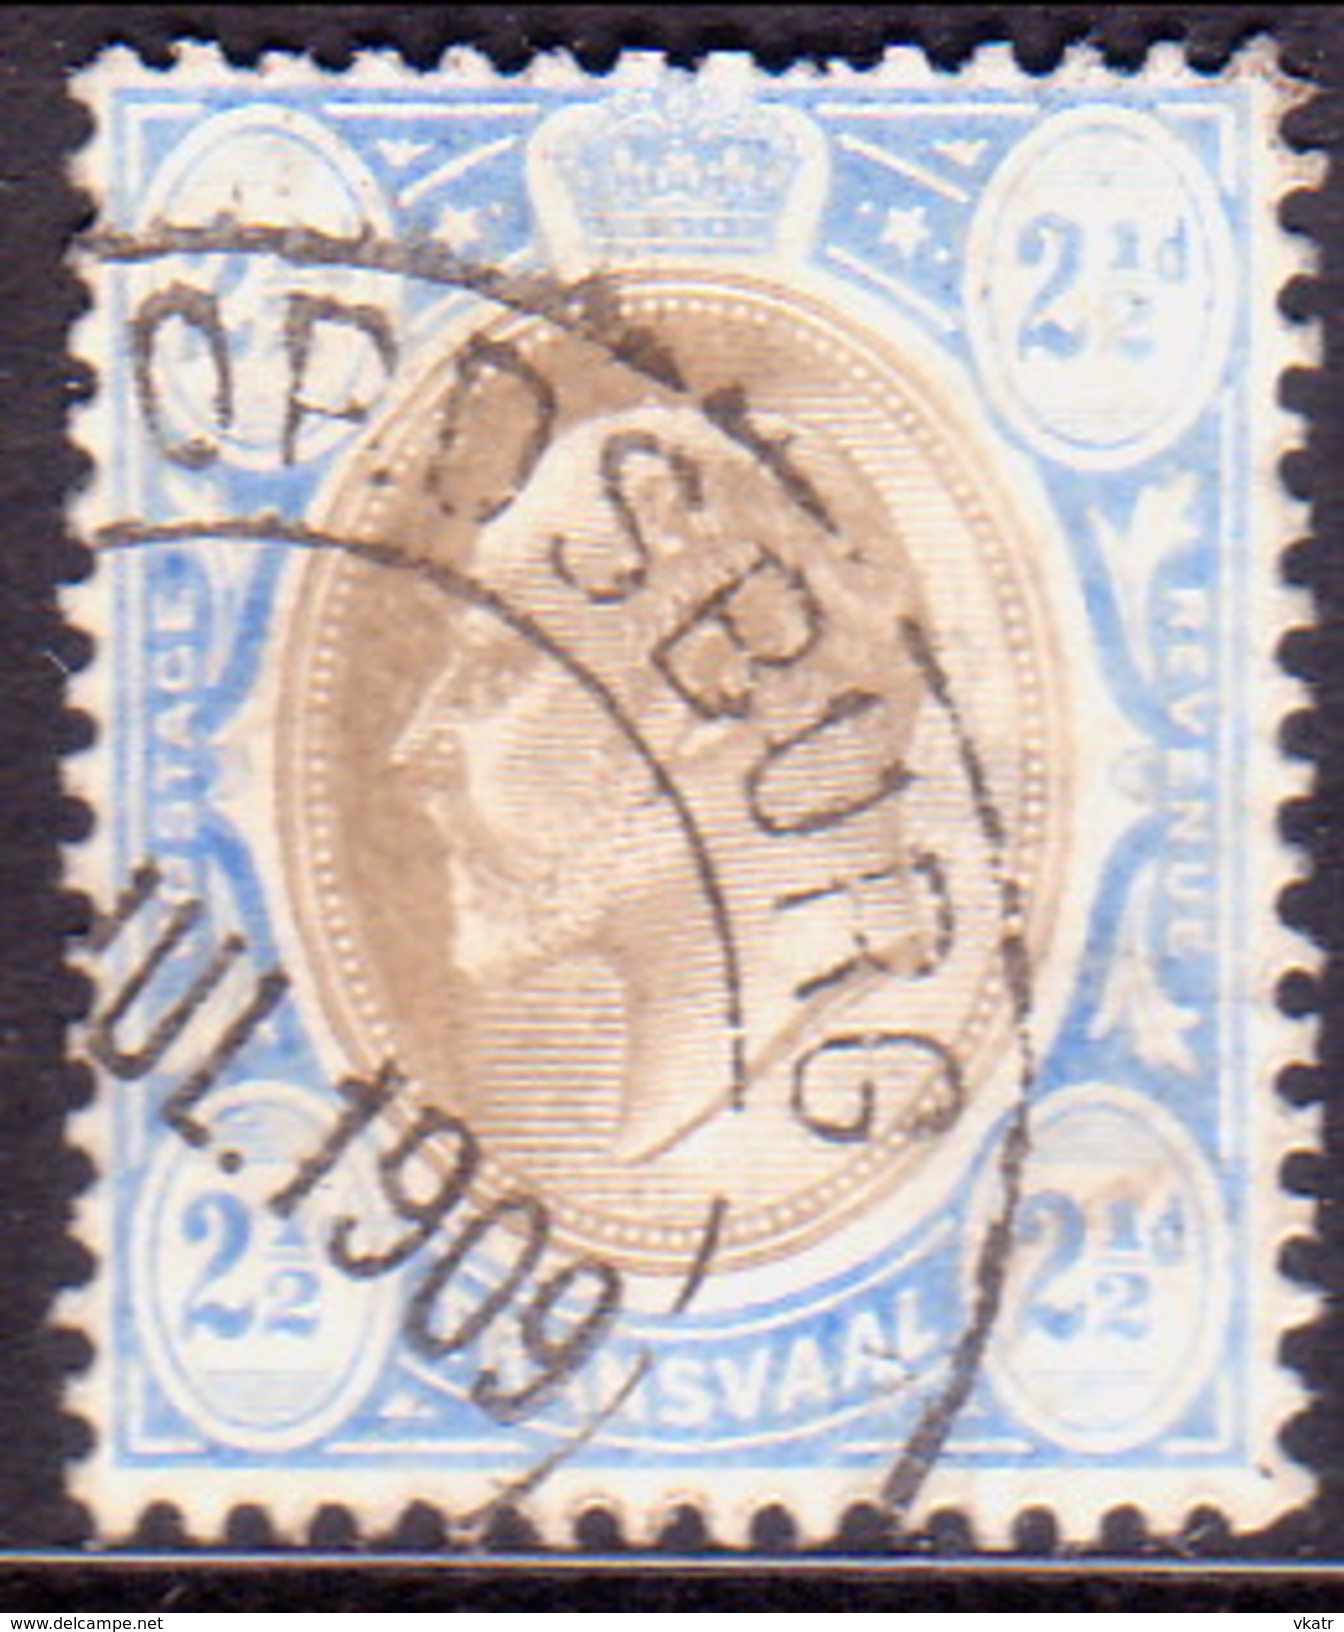 SOUTH AFRICA TRANSVAAL 1904 SG #263b 2½d VF Used Wmk Mult.Crown CA Chalk-surfaced Paper - Orange Free State (1868-1909)